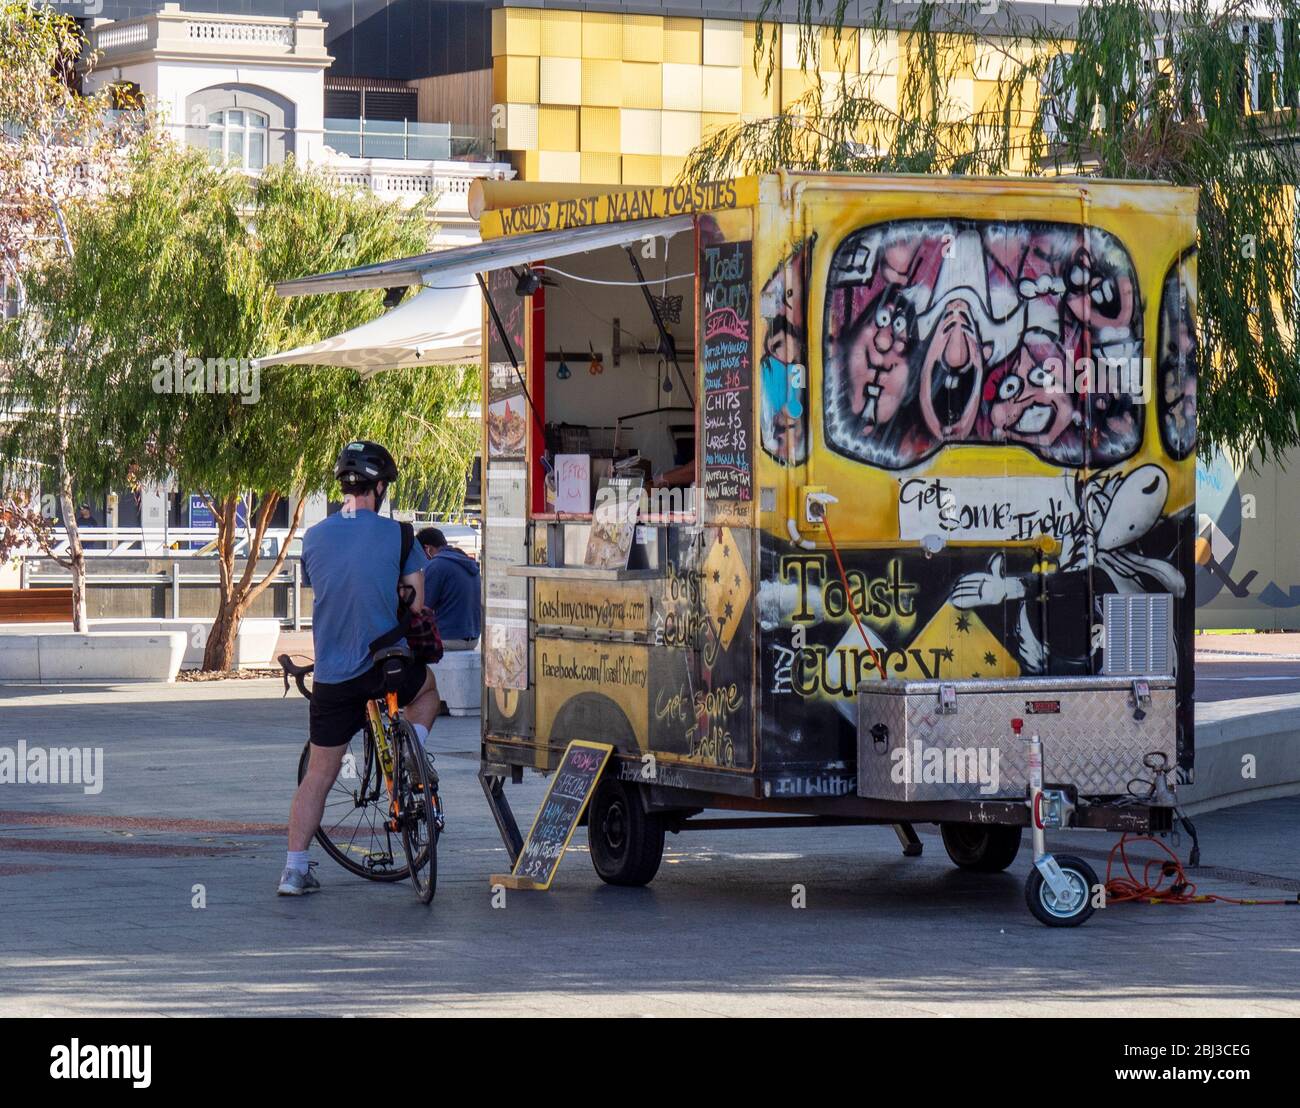 Male cyclist buying Indian take away food from a food van in Yagan Square Perth Western Australia. Stock Photo